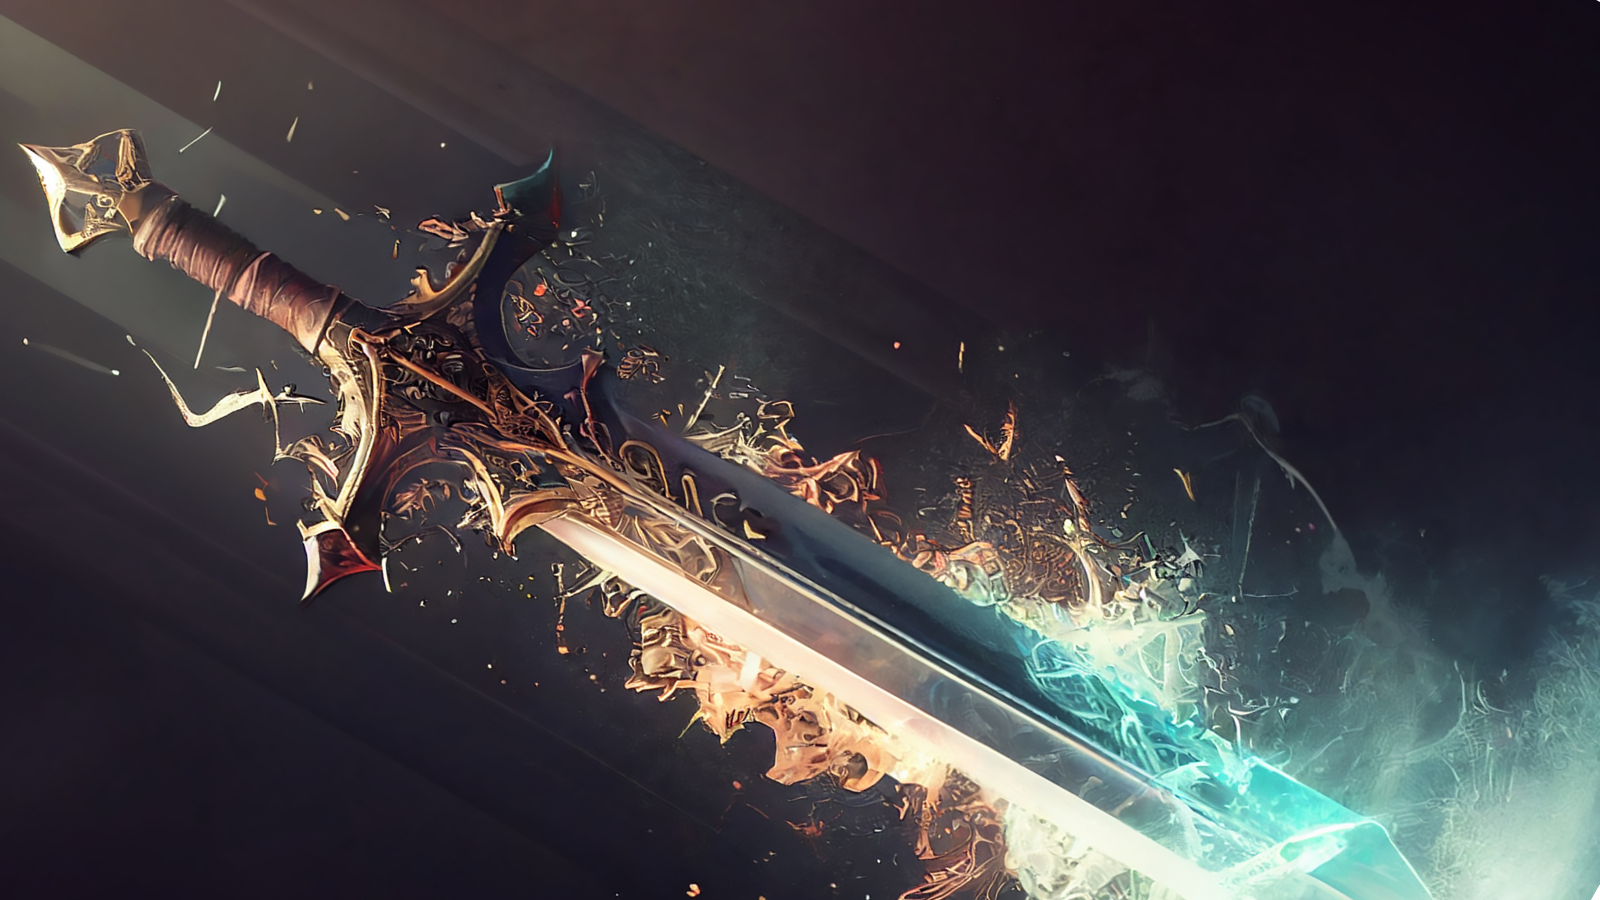 A sharp sword beaming down by light rays, with blue electricity powering up from the bottom and fire red blazing down from the top.